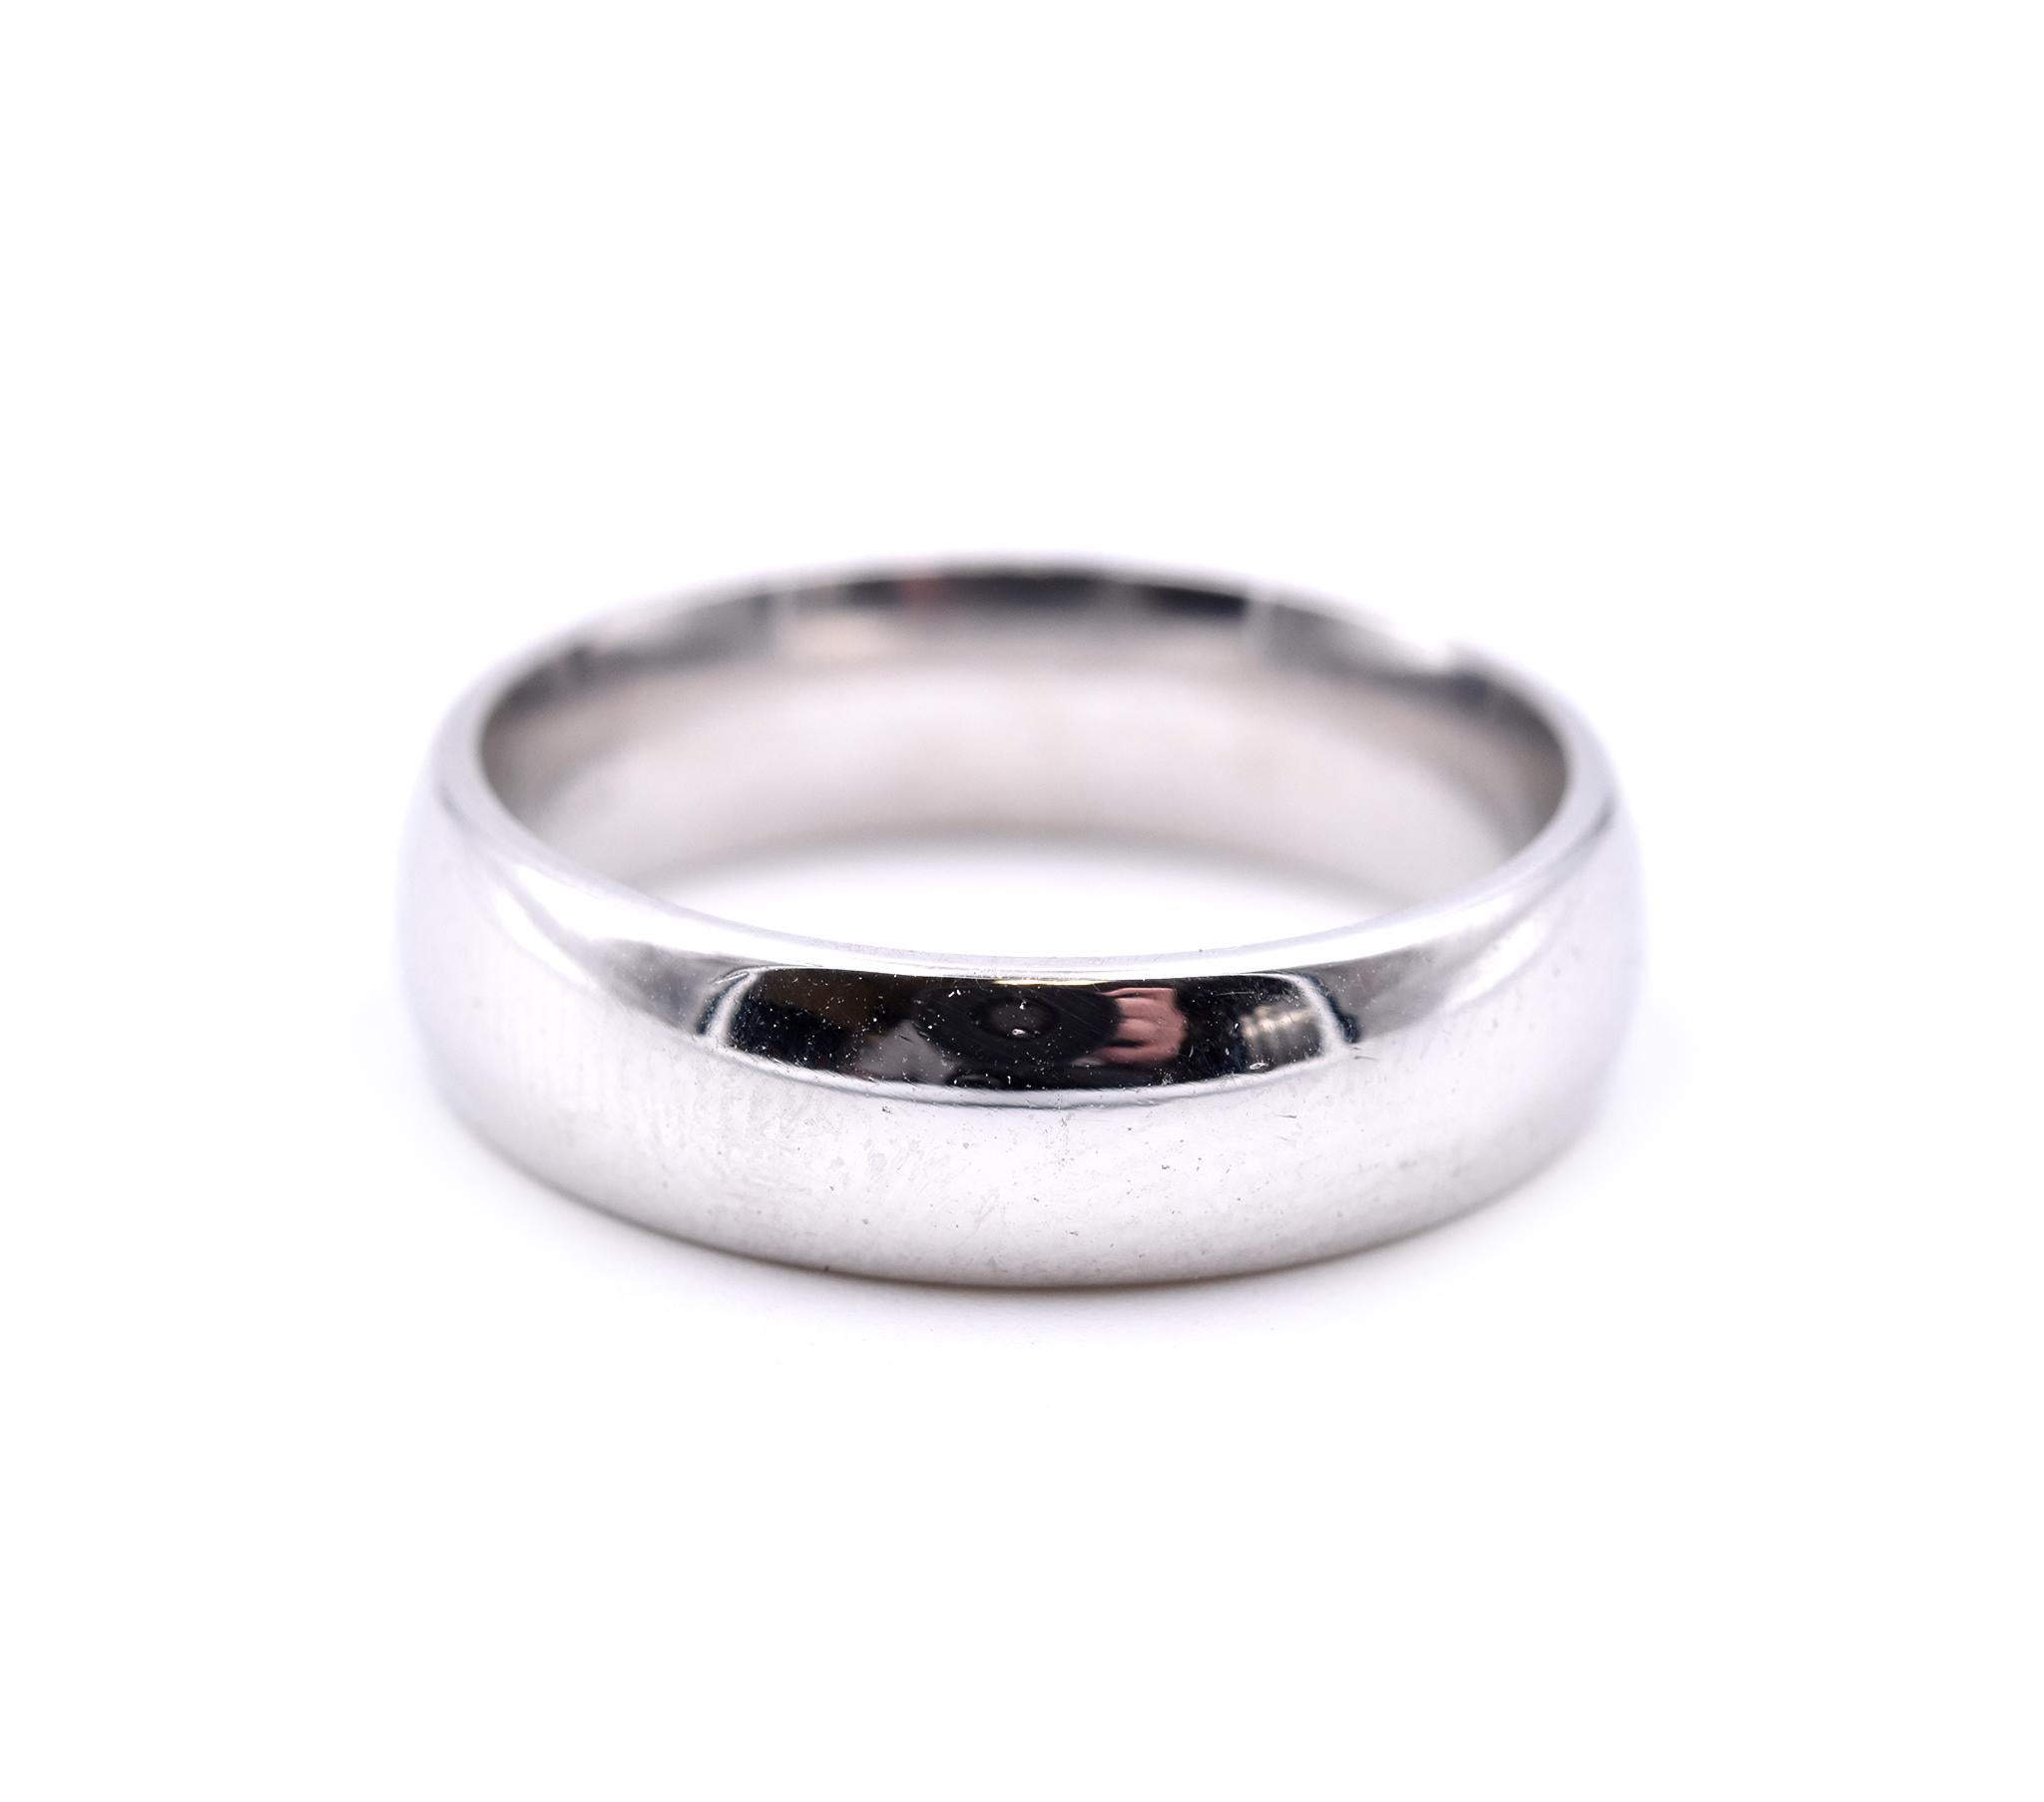 Designer: custom 
Material: 14k white gold
Dimensions: the ring measures 1 inch in length
Weight:  9.34 grams
Ring Size: 10 (Please allow up to 2 additional business days for sizing requests) 